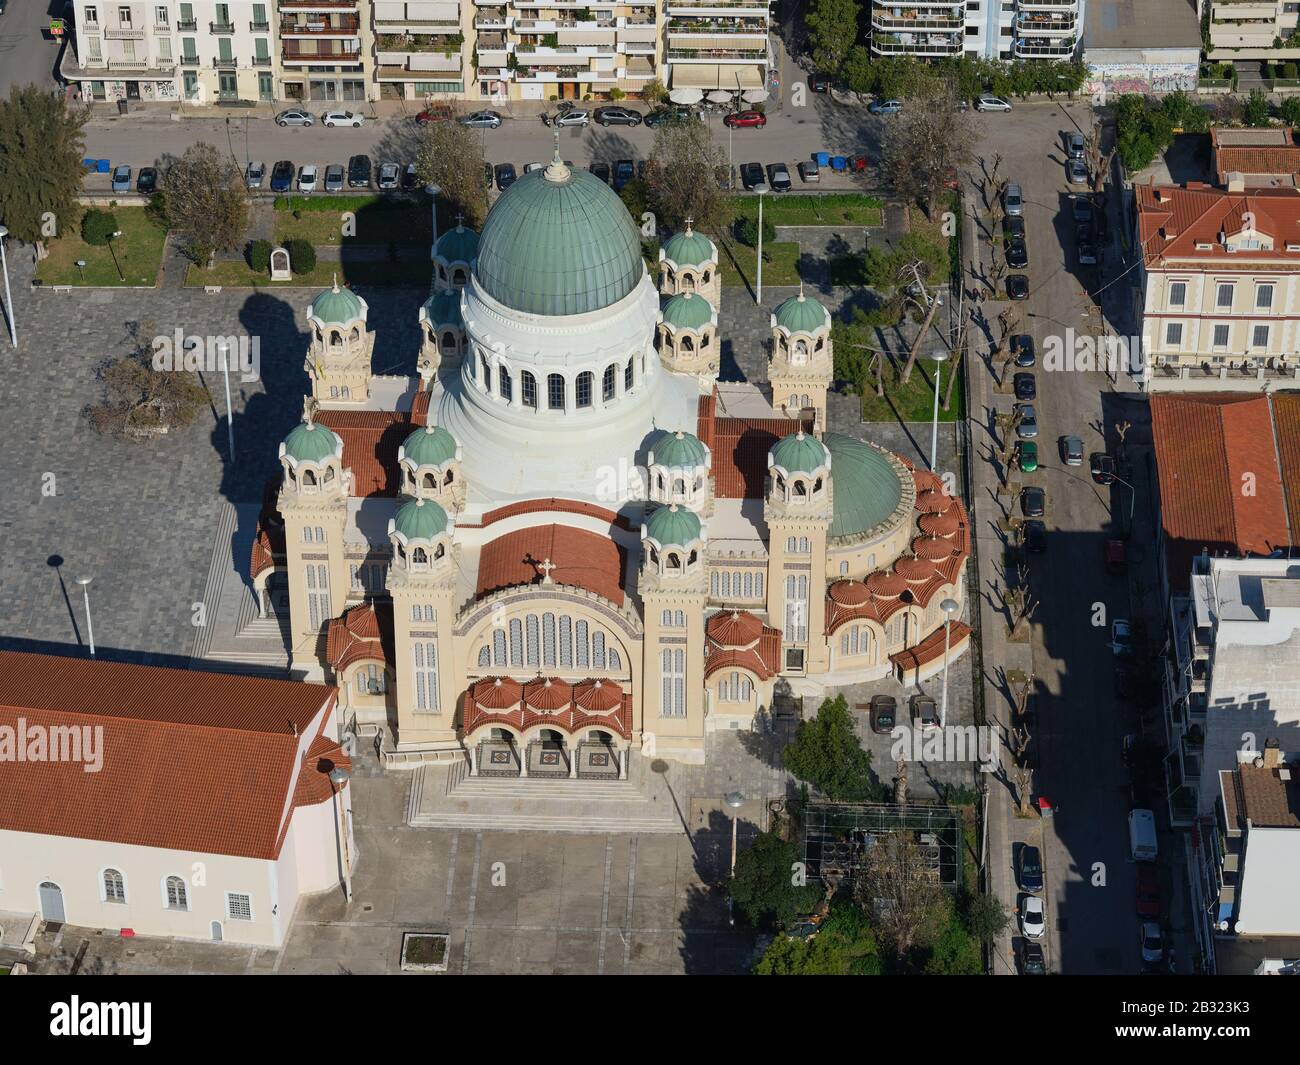 AERIAL VIEW. Large Greek orthodox cathedral. Saint-Andrew Cathedral, Patras, West Greece, Peloponnese Peninsula, Greece. Stock Photo